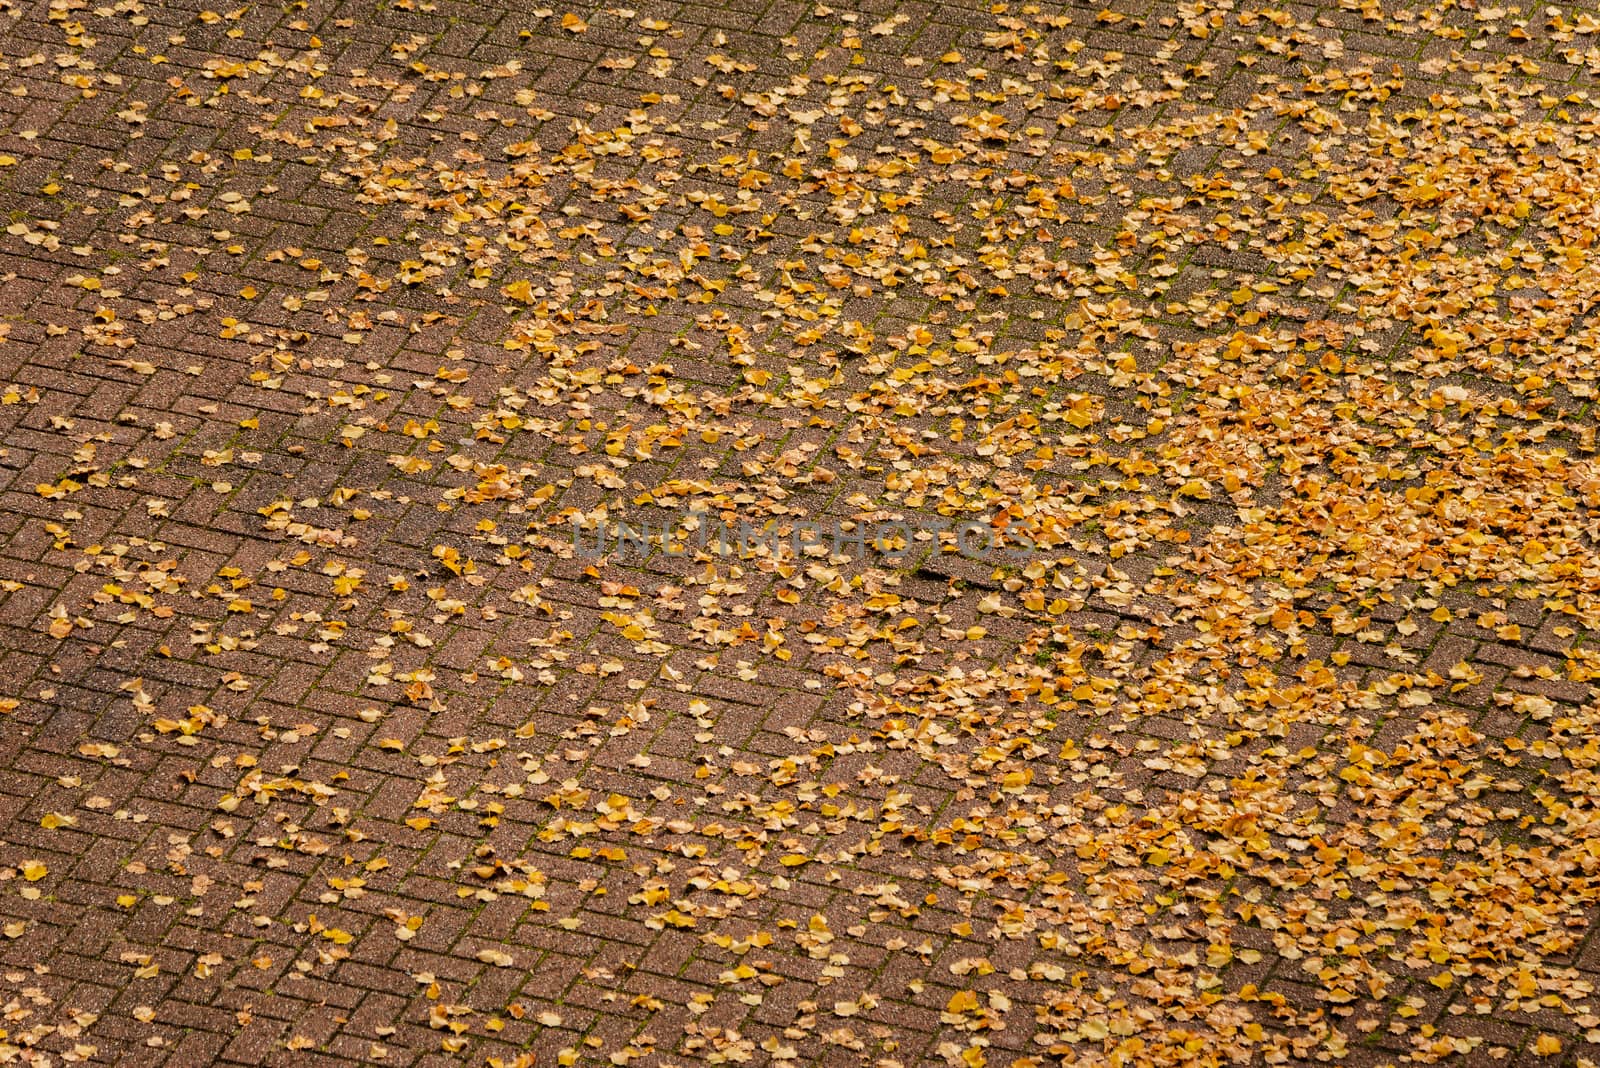 Aerial perspective of autumn leaves covering bricks on the ground.